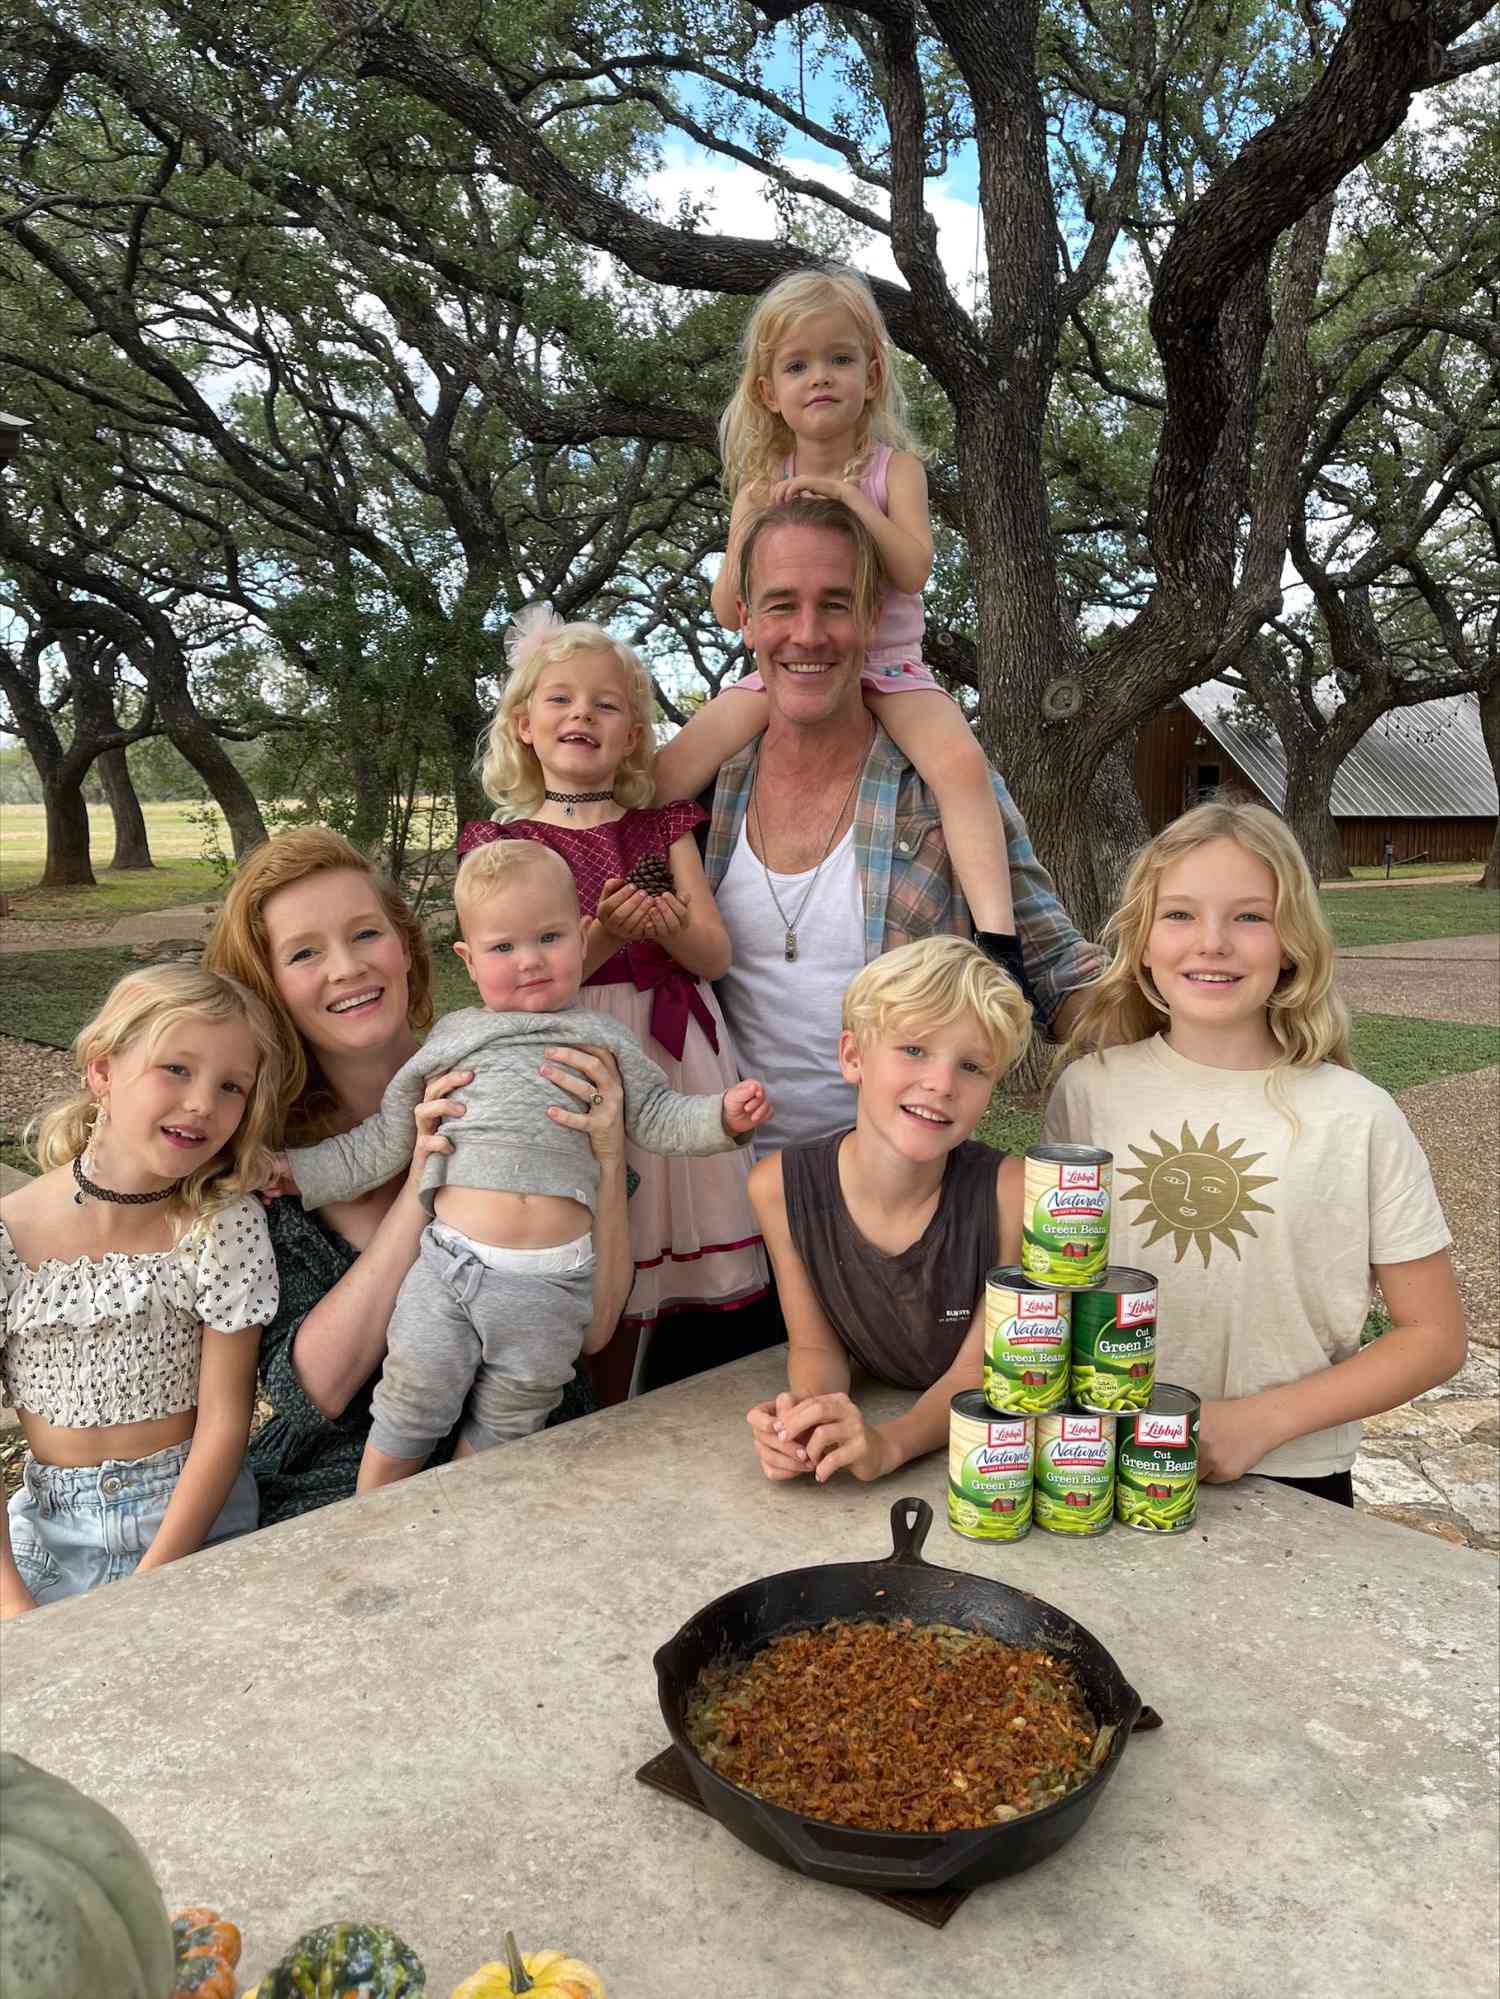 James Van Der Beek & Family (Photo provided by Libby's Vegetables)